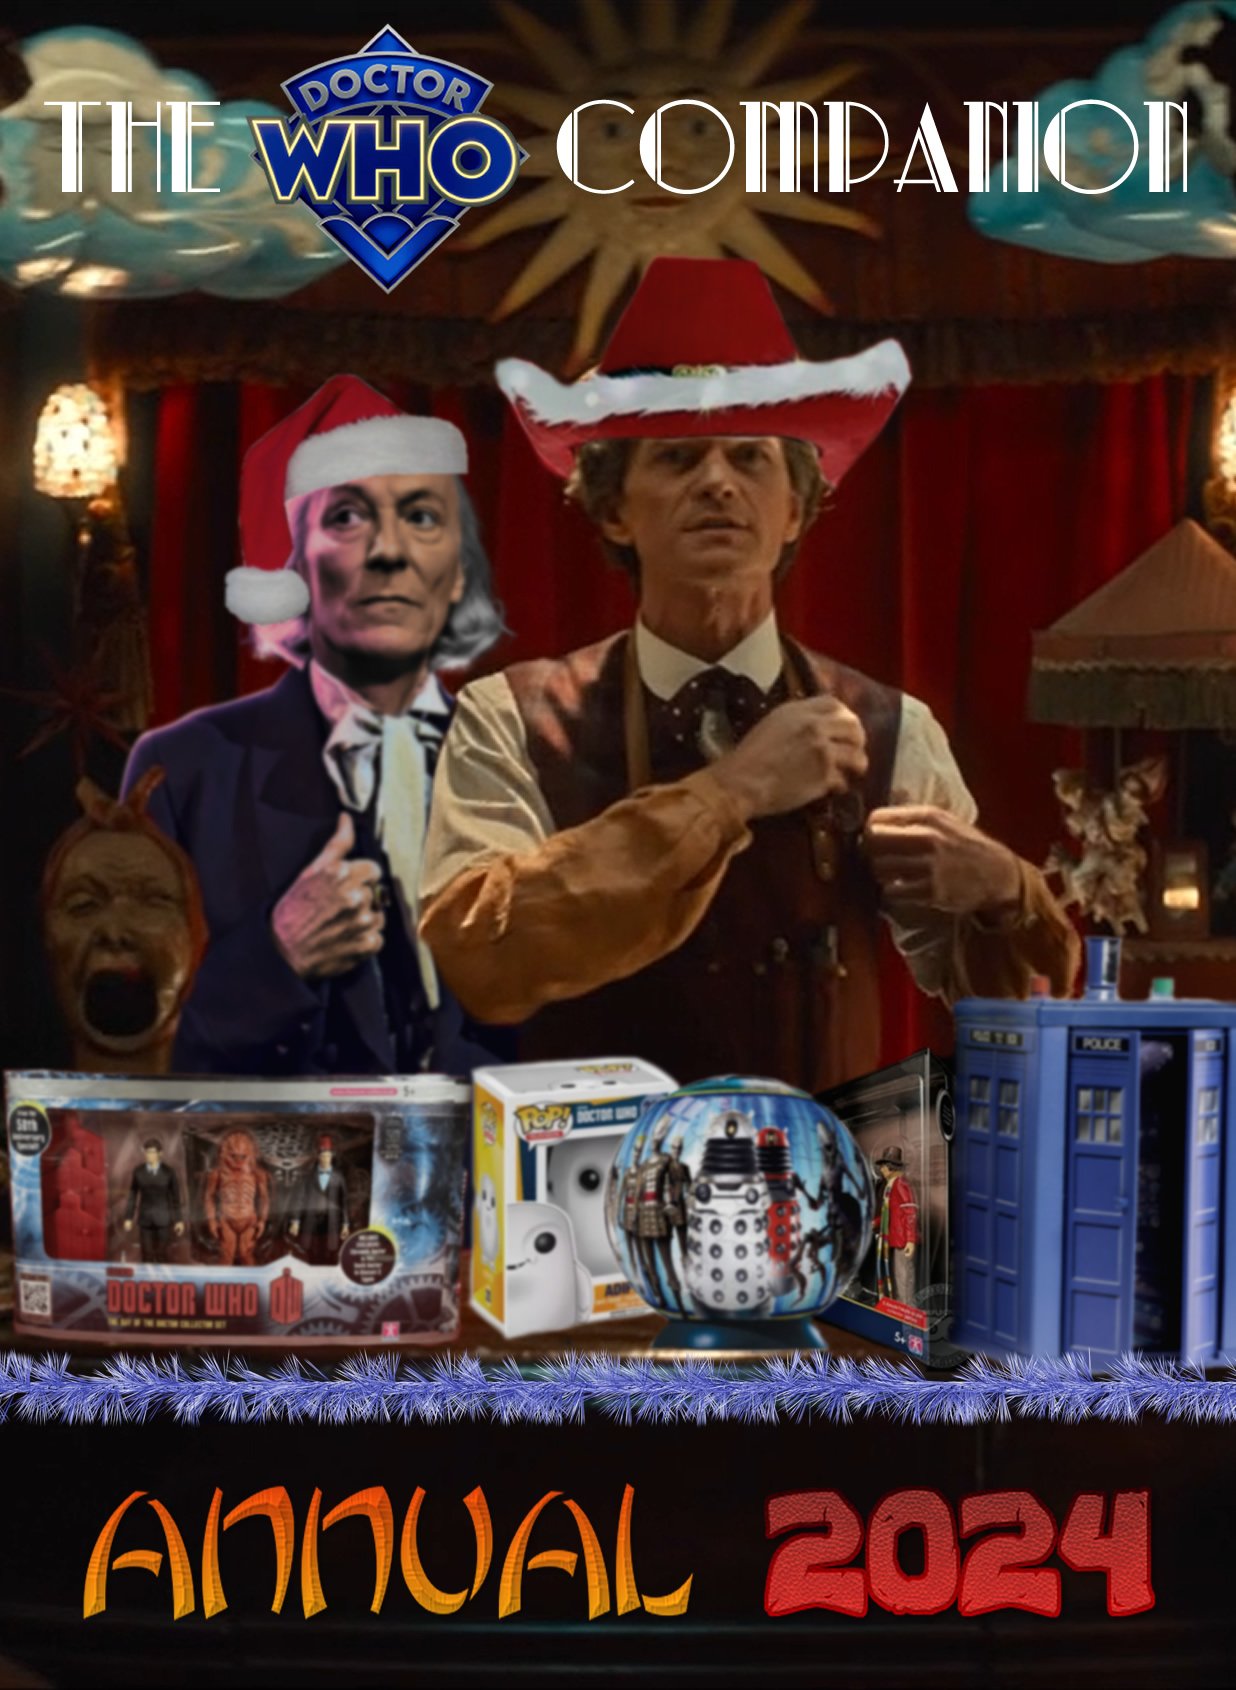 Merry Christmas! Celebrate with The Doctor Who Companion Annual 2024 — FREE to Download